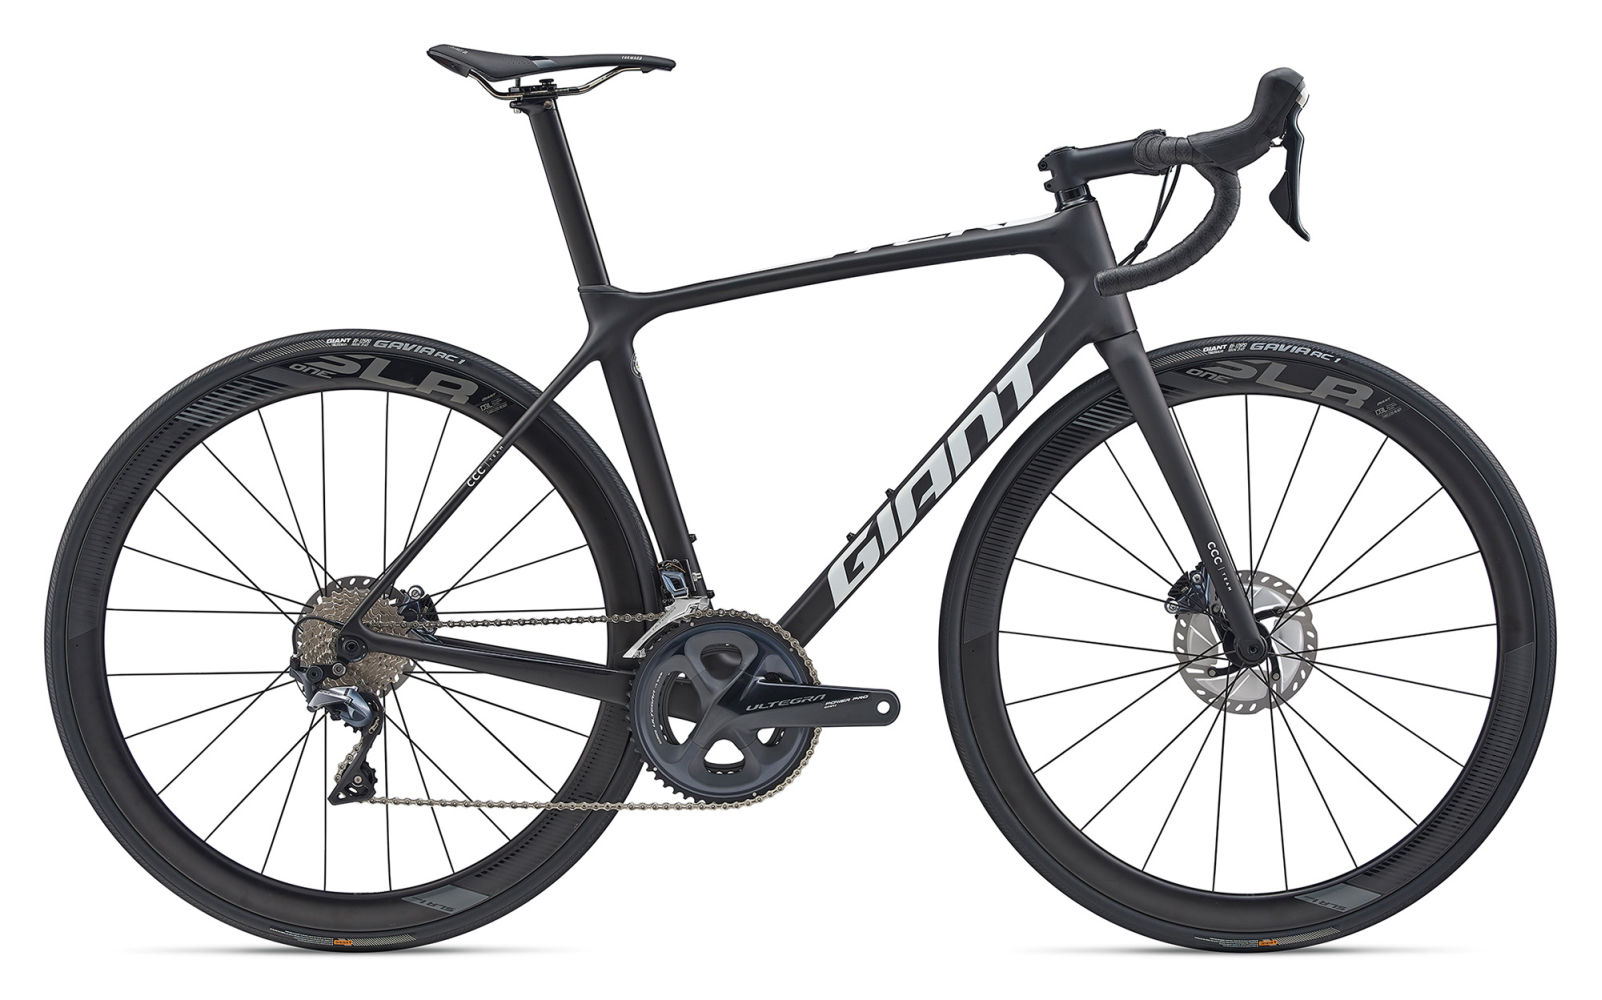 https://images.giant-bicycles.com/b_white,c_pad,h_1000,q_80/smxywltyqccvqfhqpujw/MY20TCRADPROTeamD_ColorA.jpg